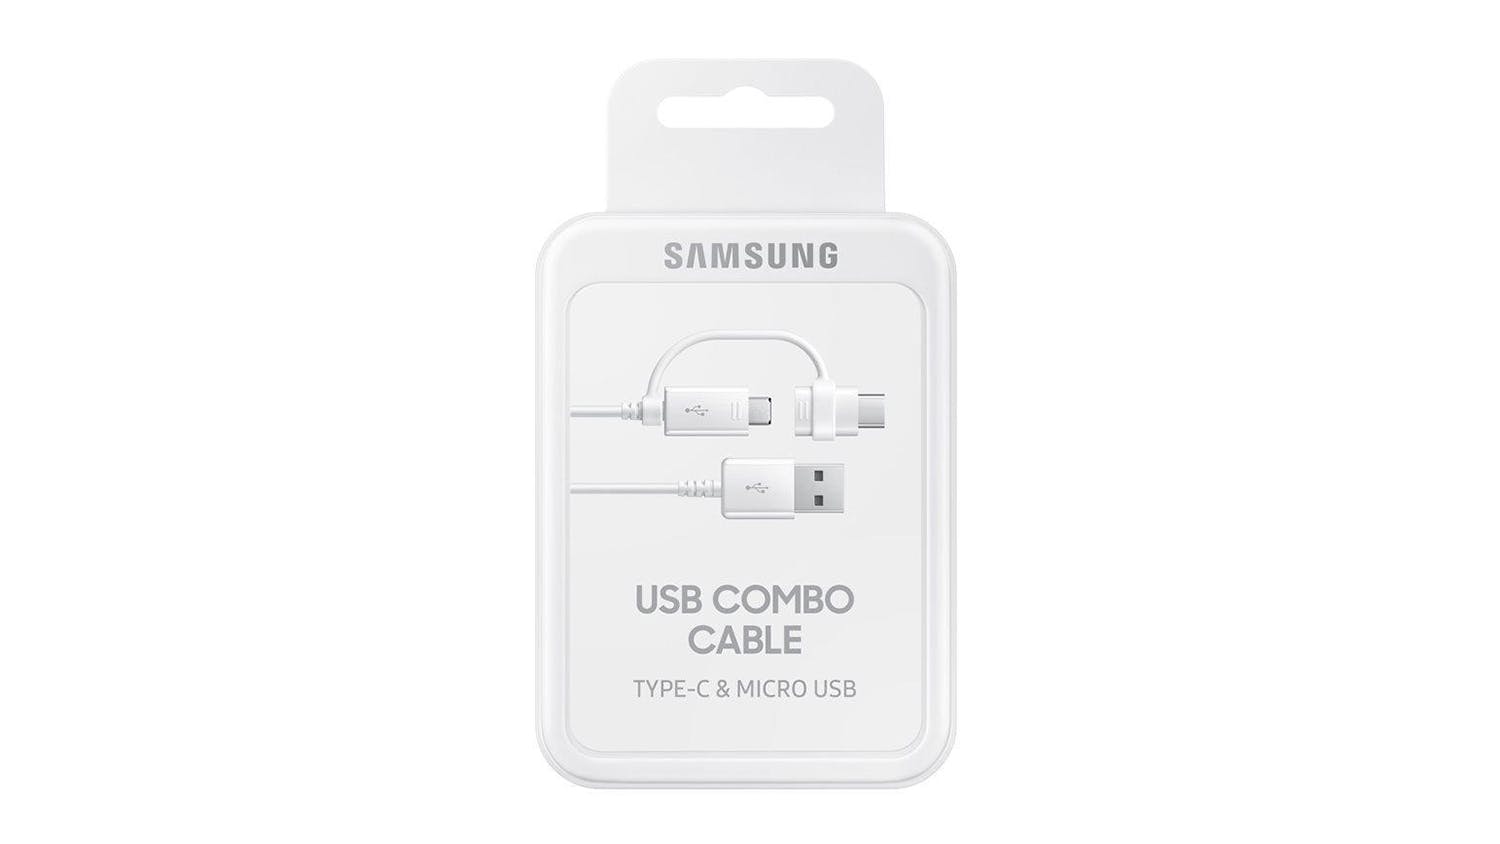 Samsung 2-in-1 USB-A to USB Type-C & Micro USB Cable Combo